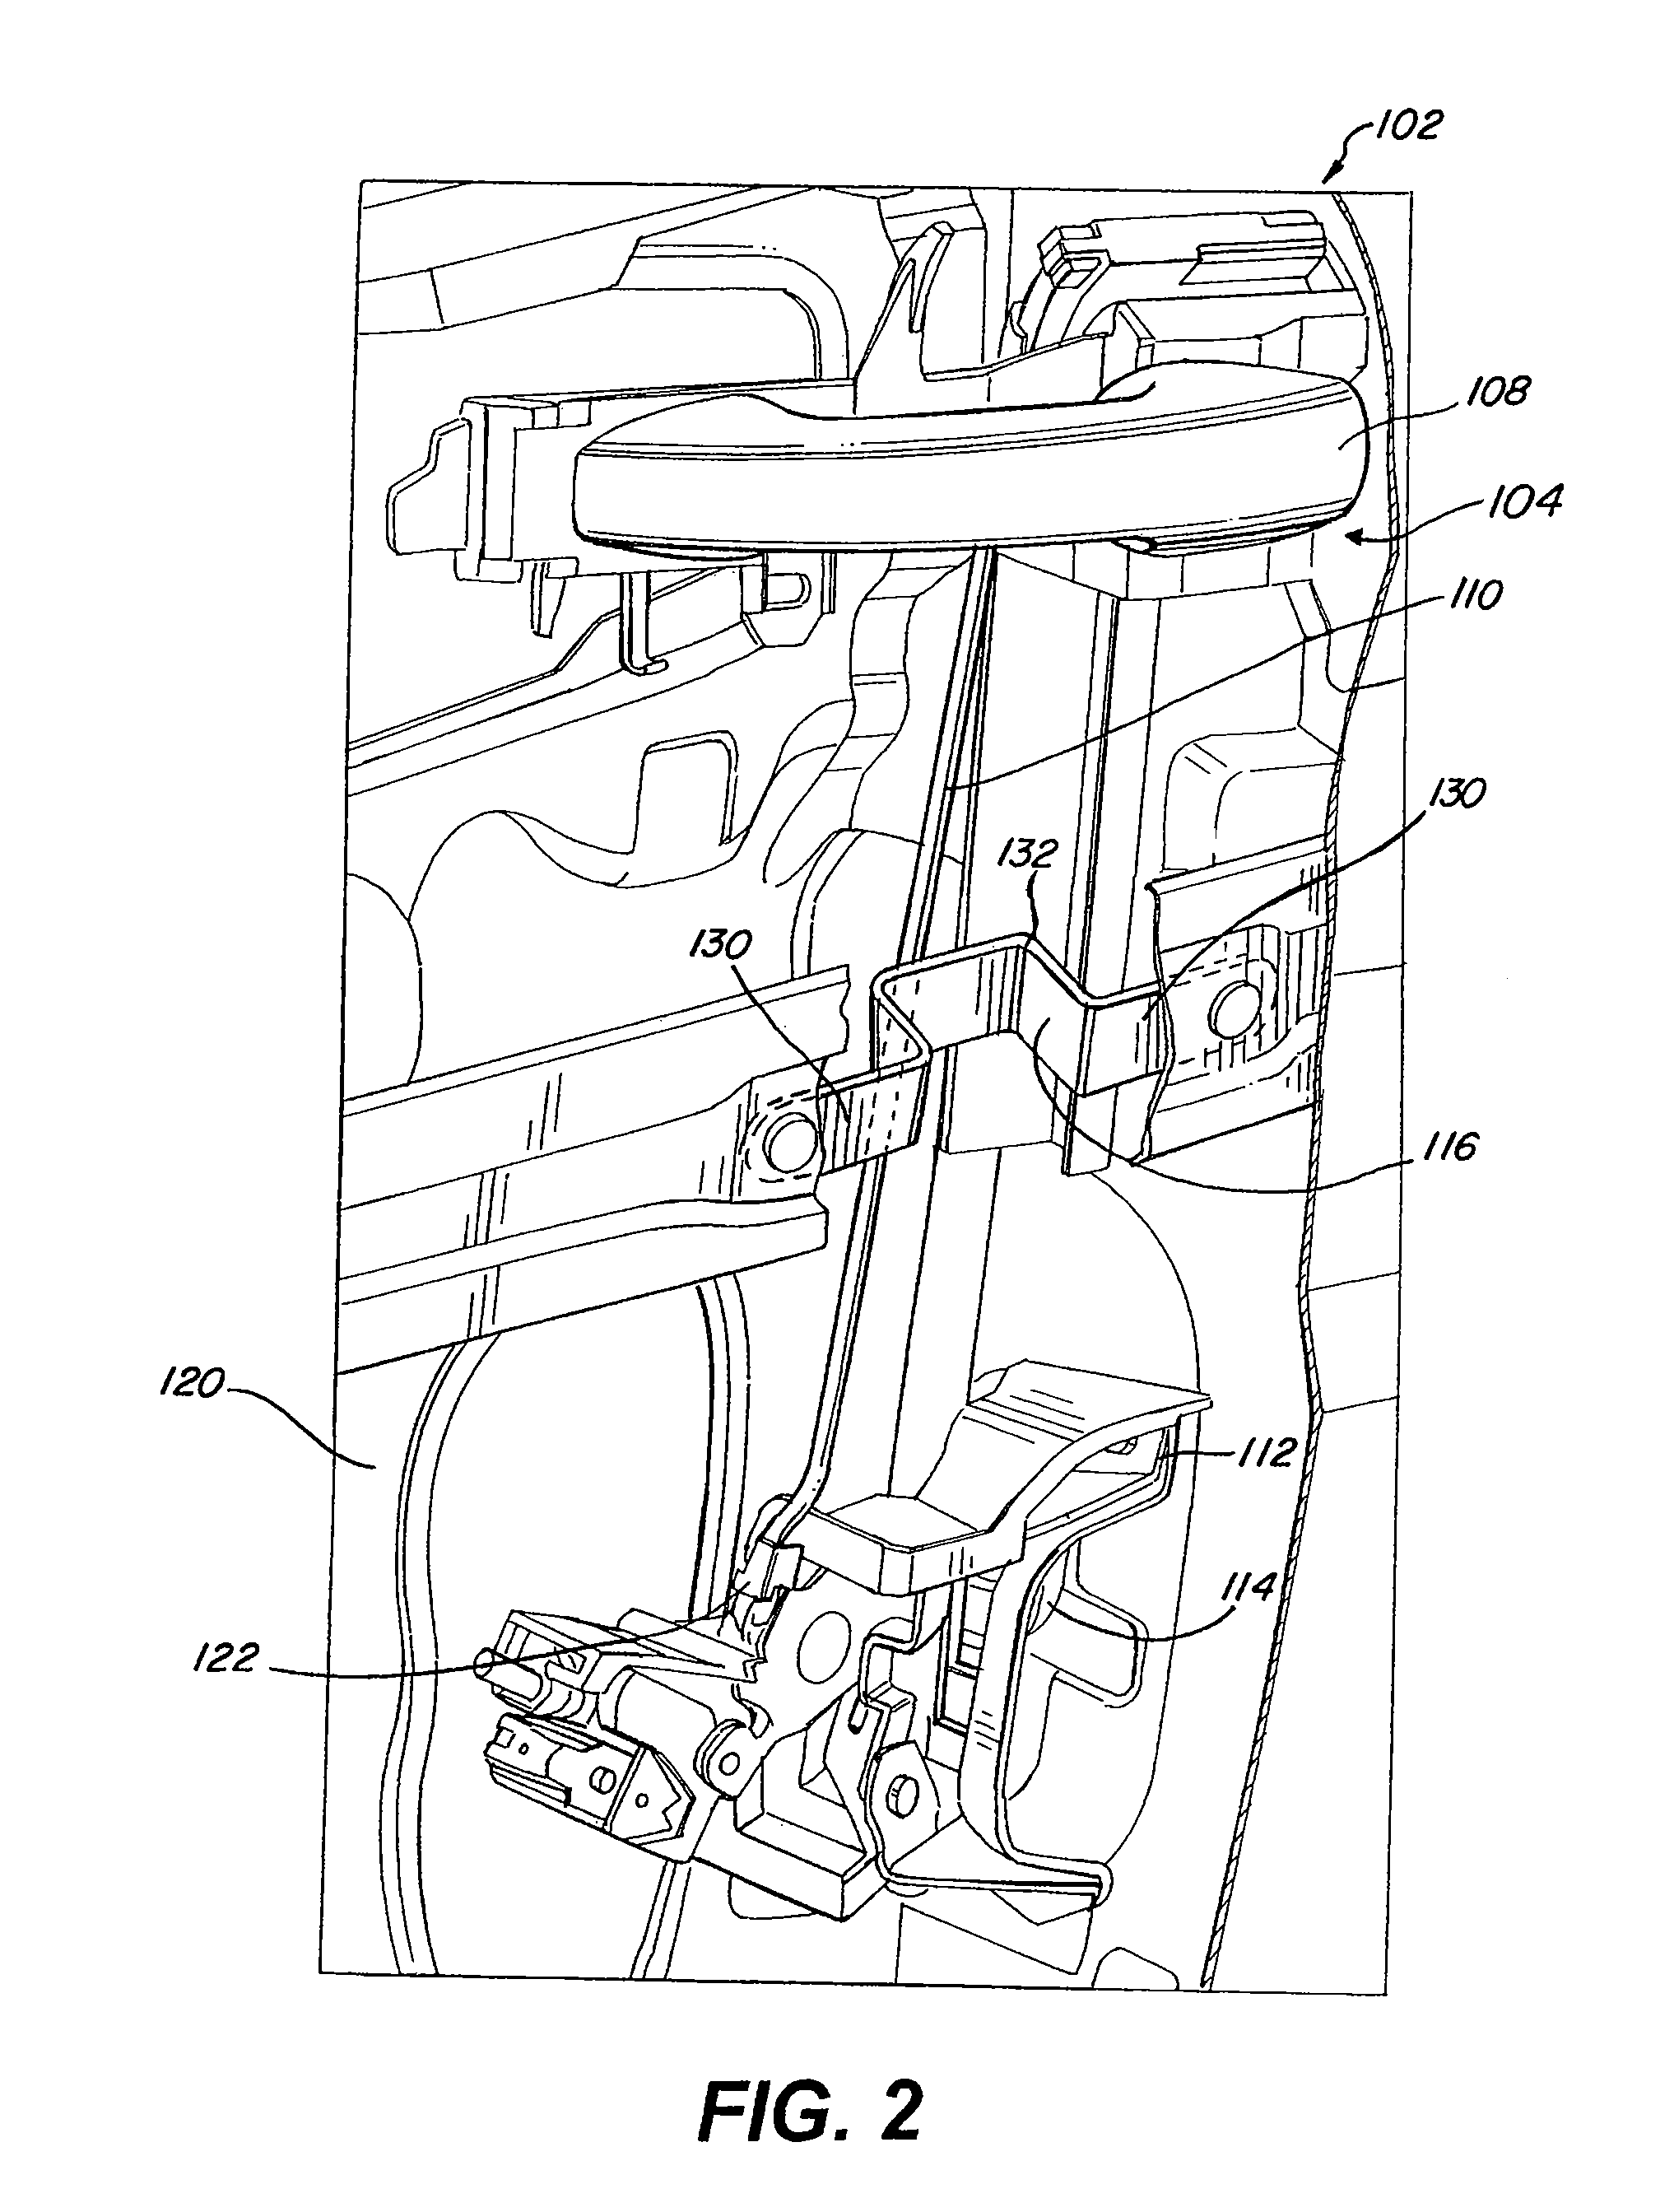 Method and system for deforming a drive rod in a door after an impact to the door